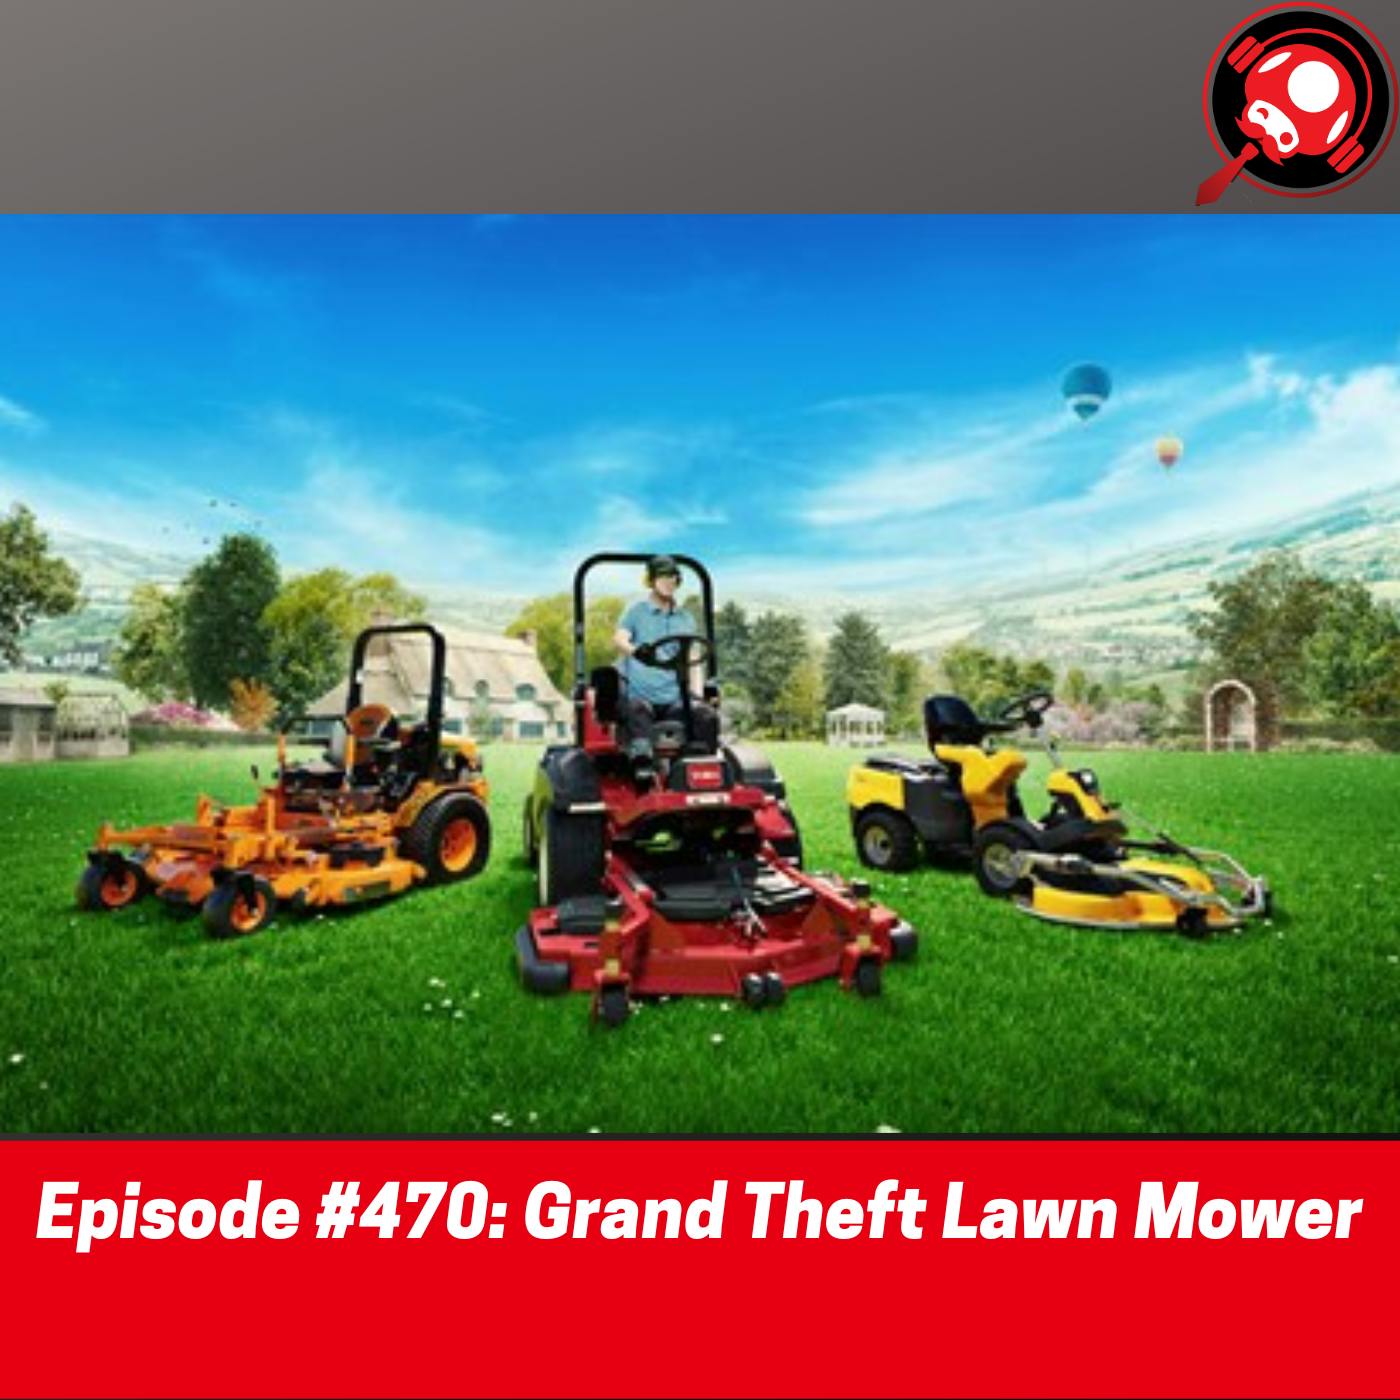 #470: Grand Theft Lawn Mower